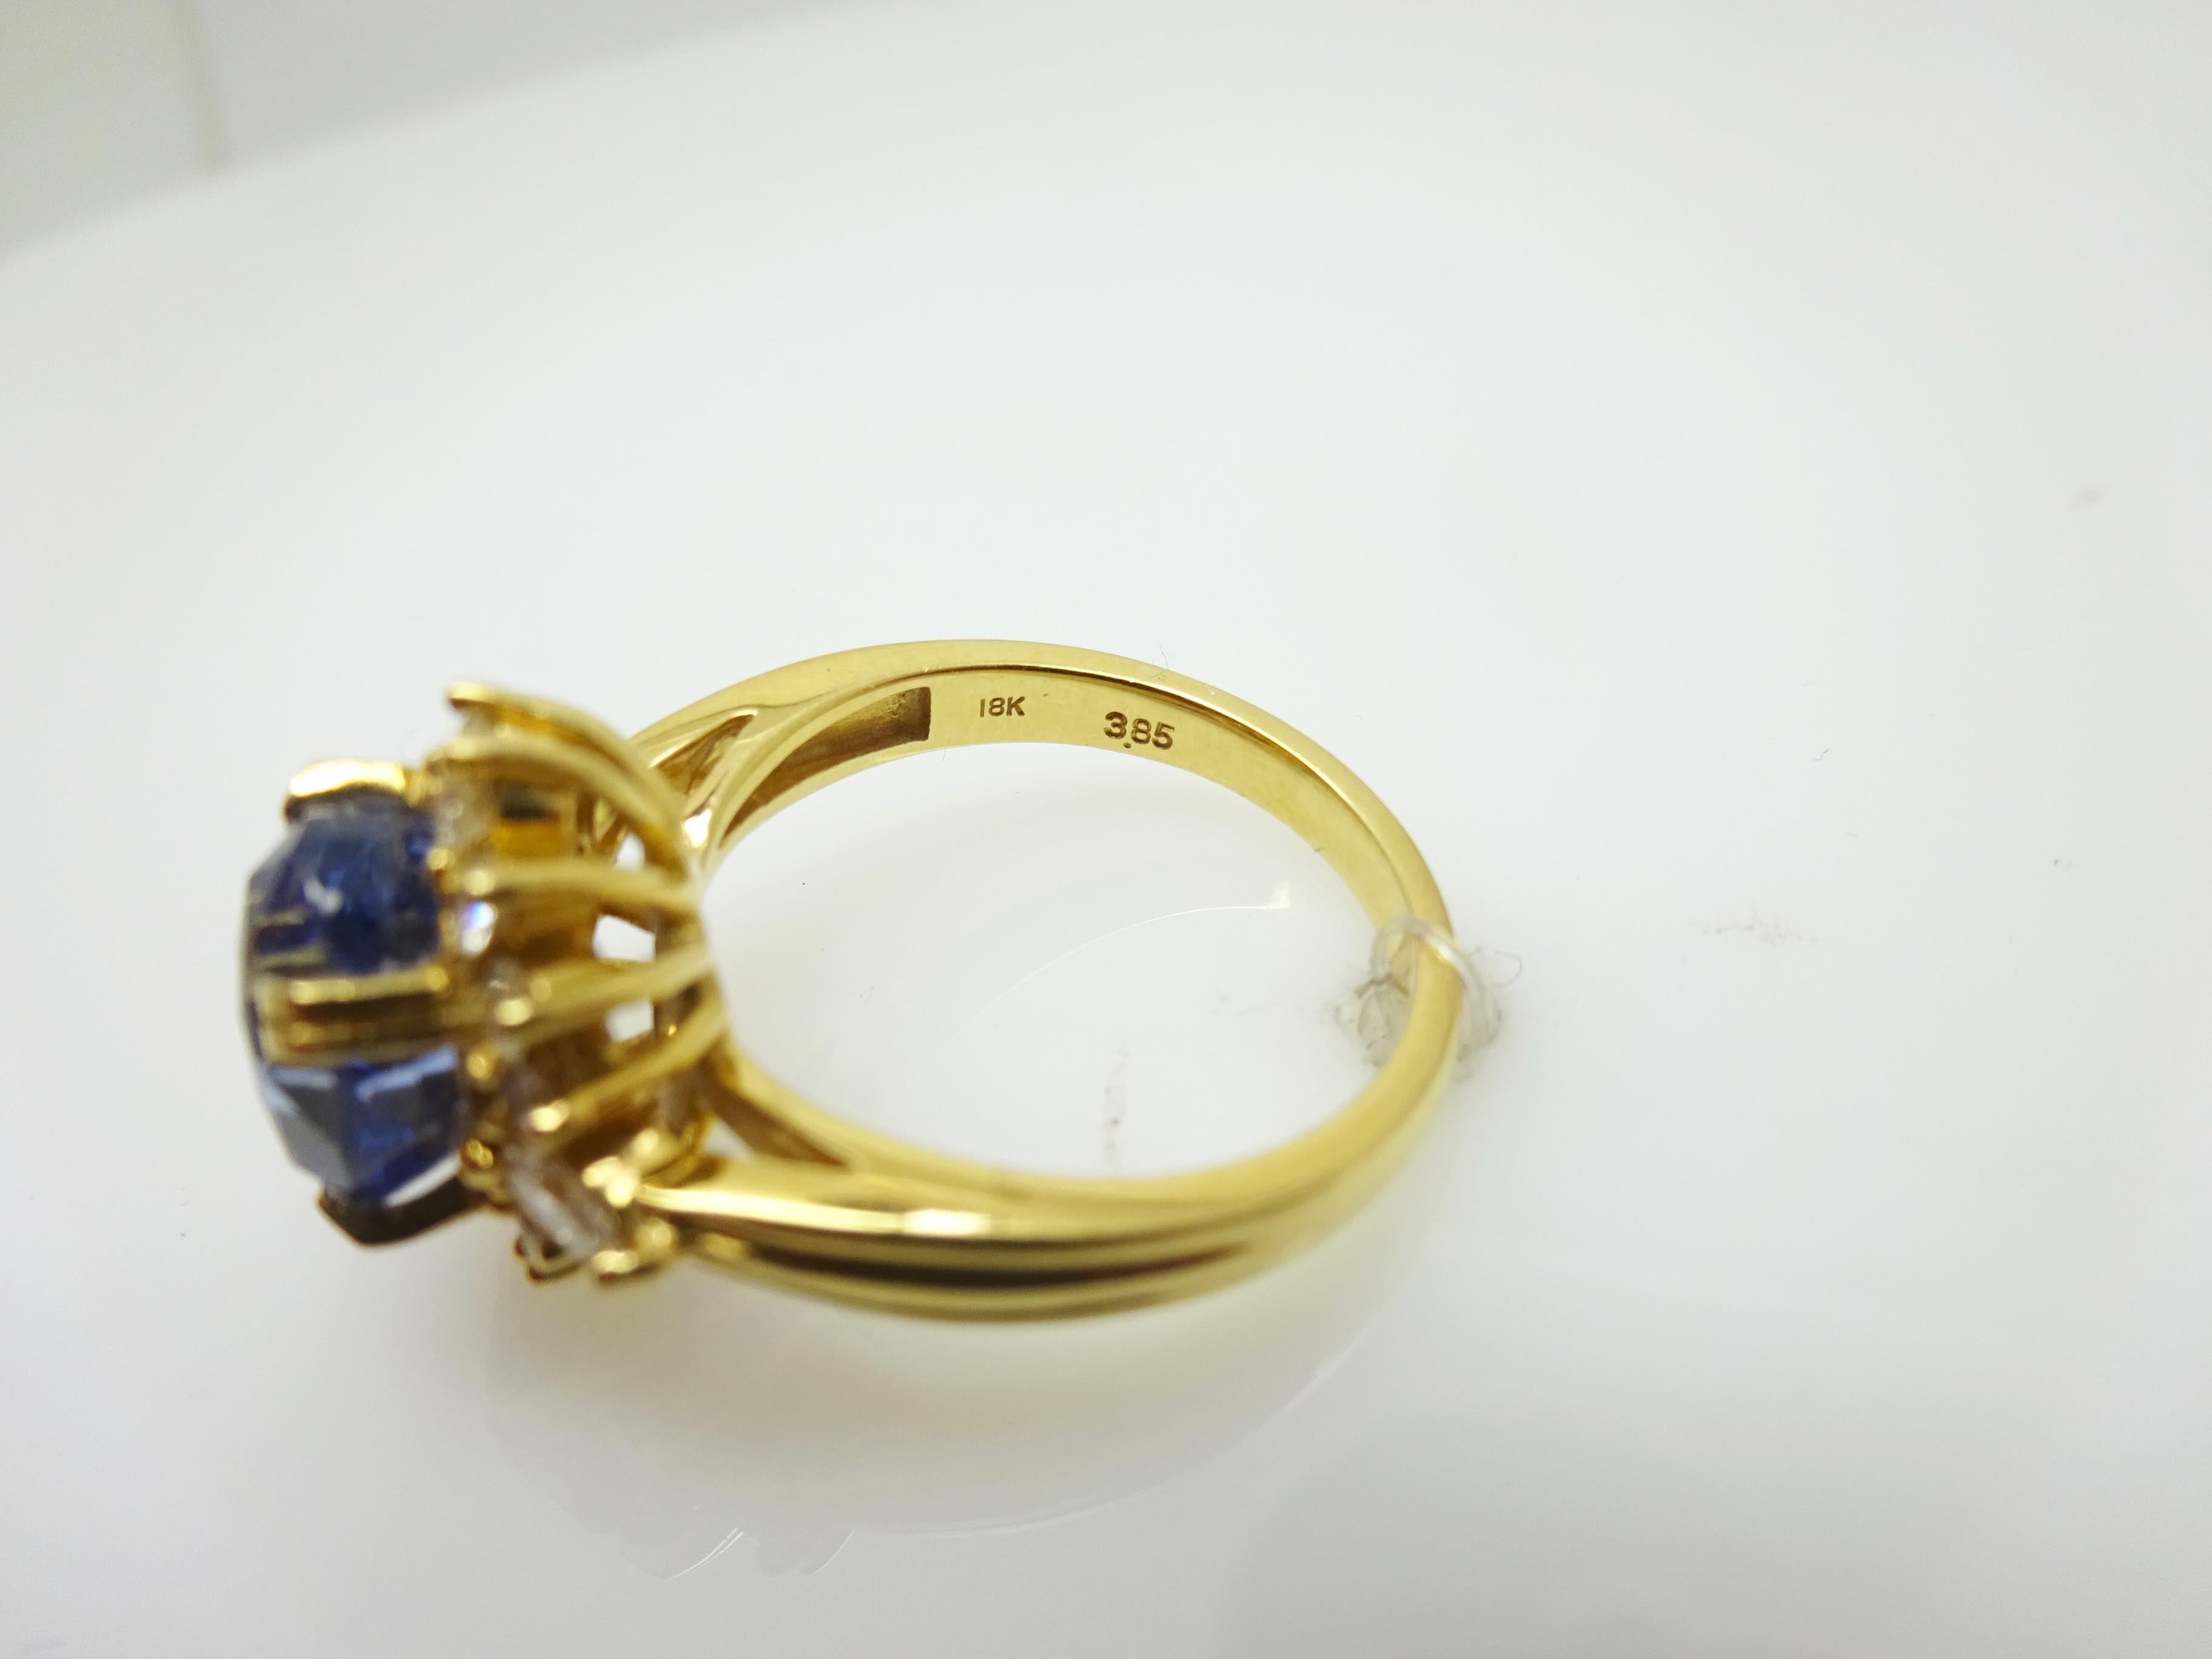 18k Gold 4.34cts Genuine Natural Ceylon Sapphire and Diamond Ring '#J3398' For Sale 1